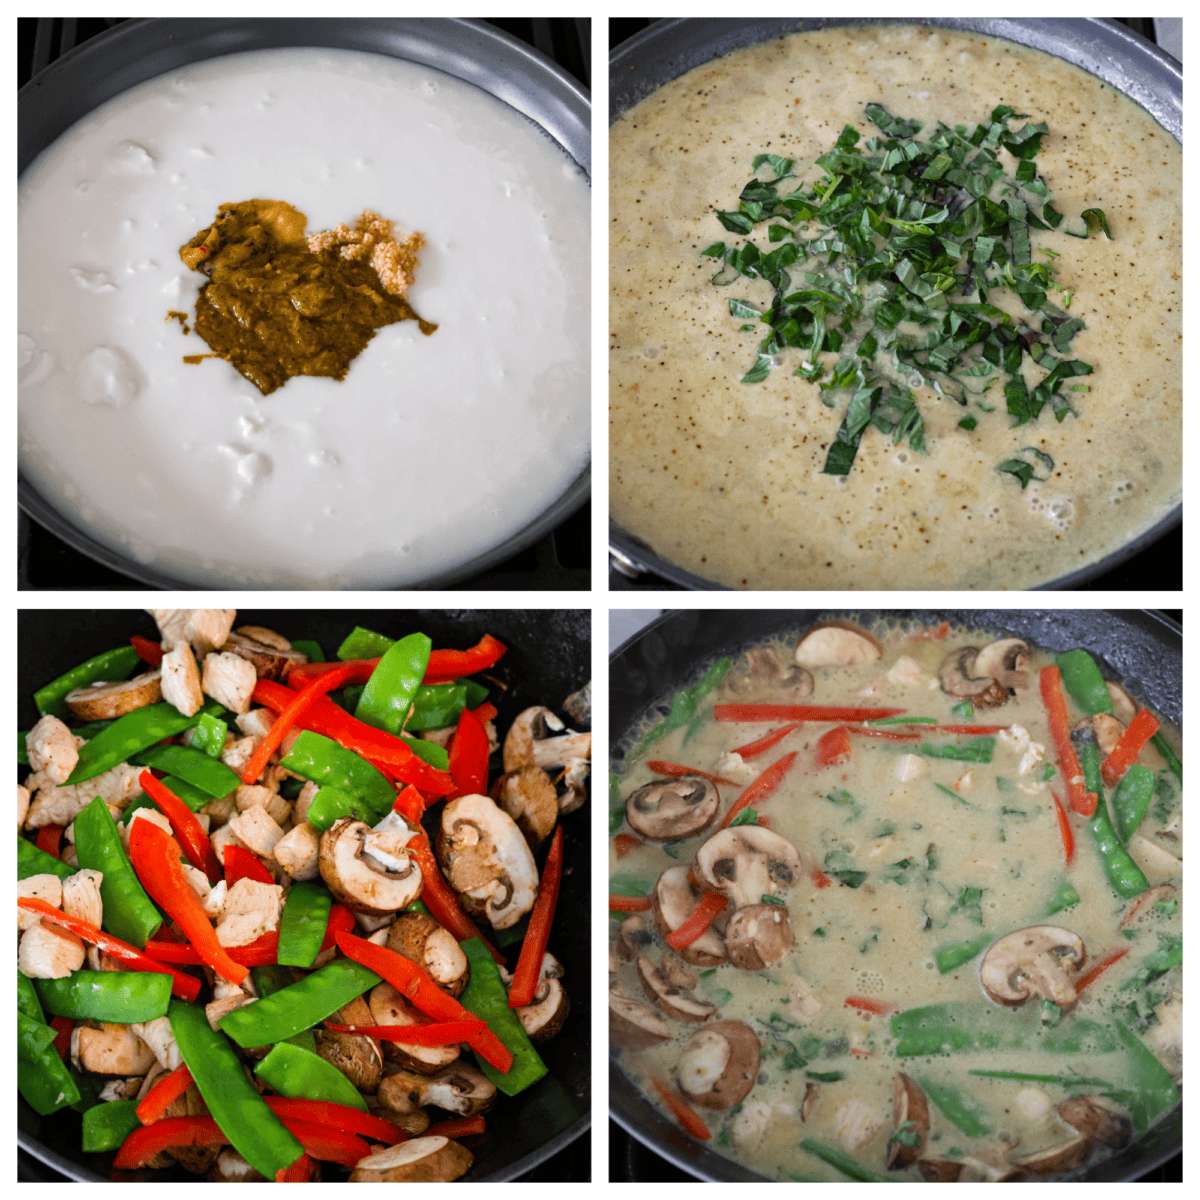 4-photo collage of the curry, chicken, and vegetables being prepared.